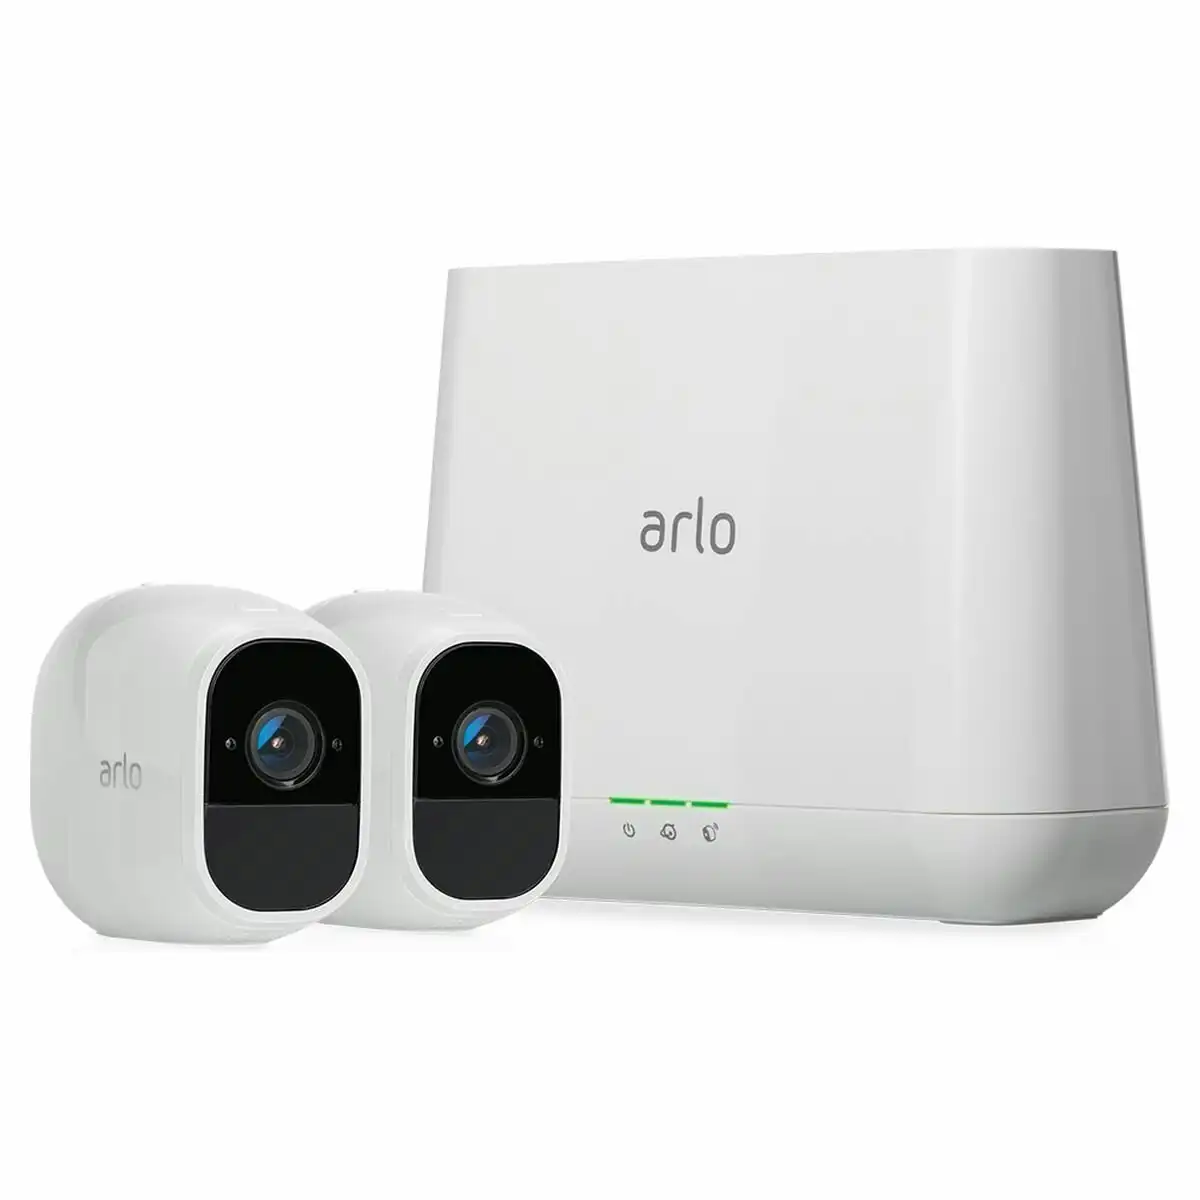 Arlo Pro 2 1080p Full HD Wireless Security System with 2 Cameras